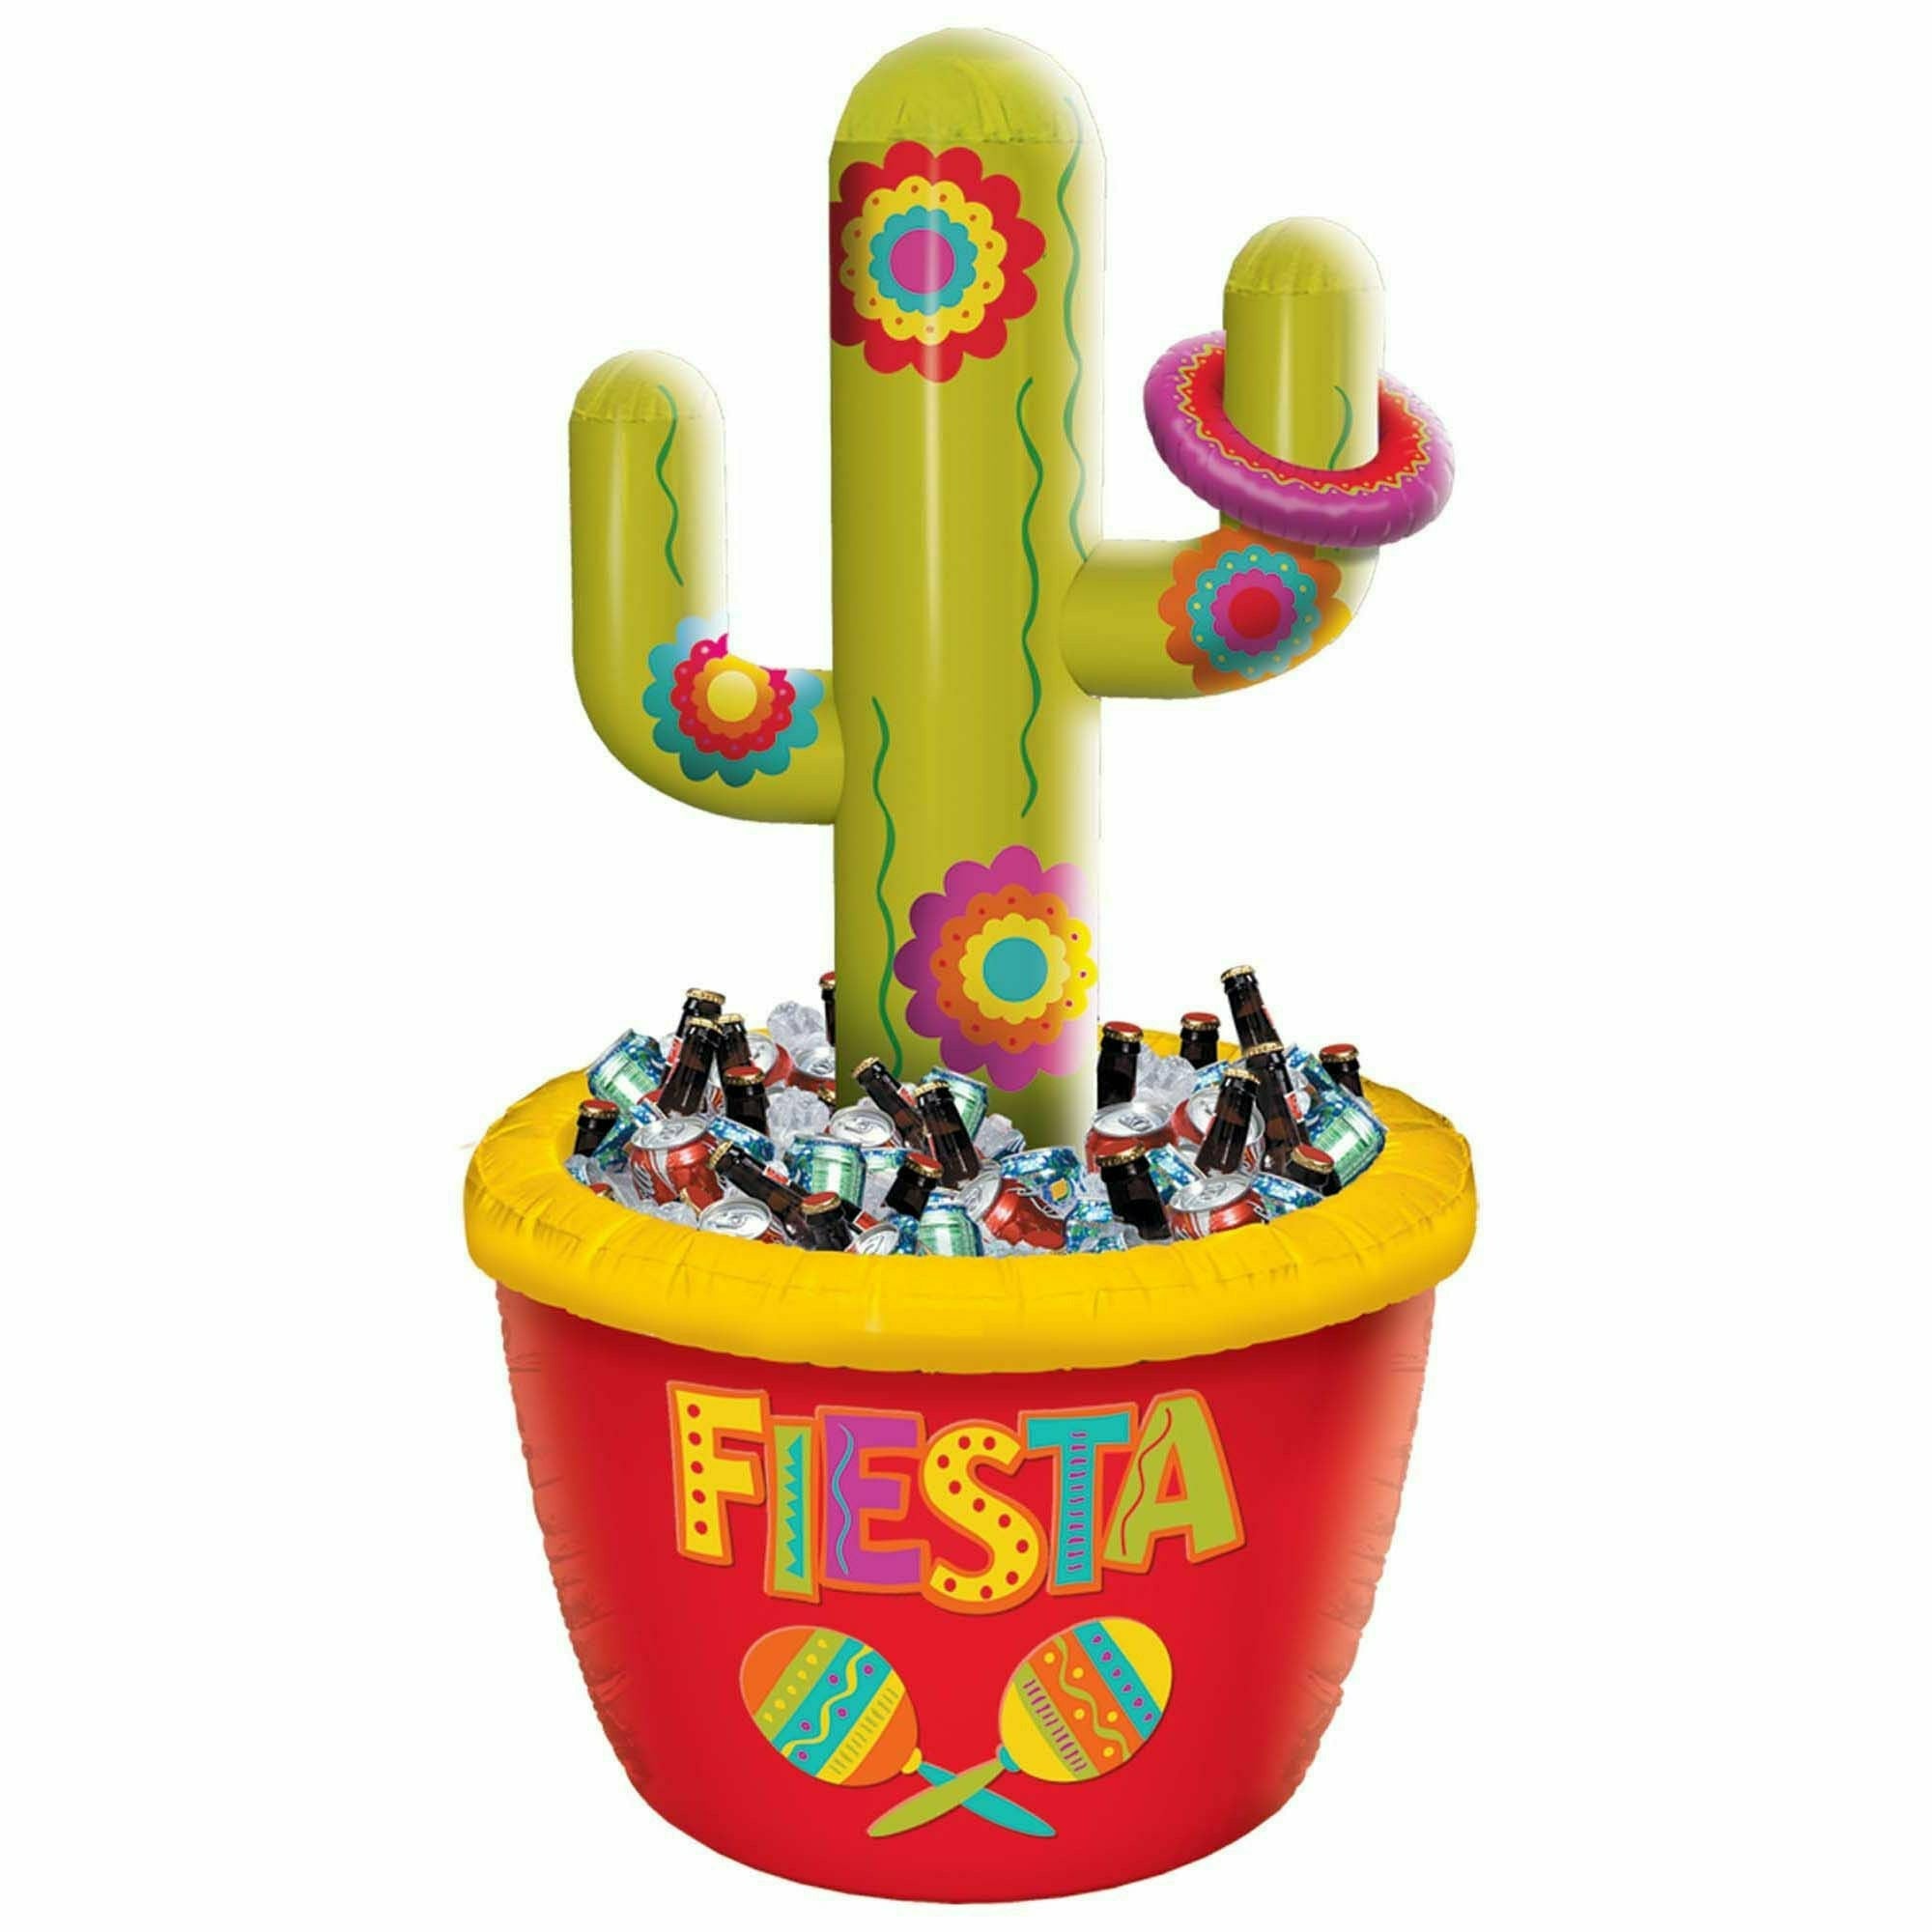 Amscan HOLIDAY: FIESTA Inflatable Cactus Cooler and Ring Toss Game